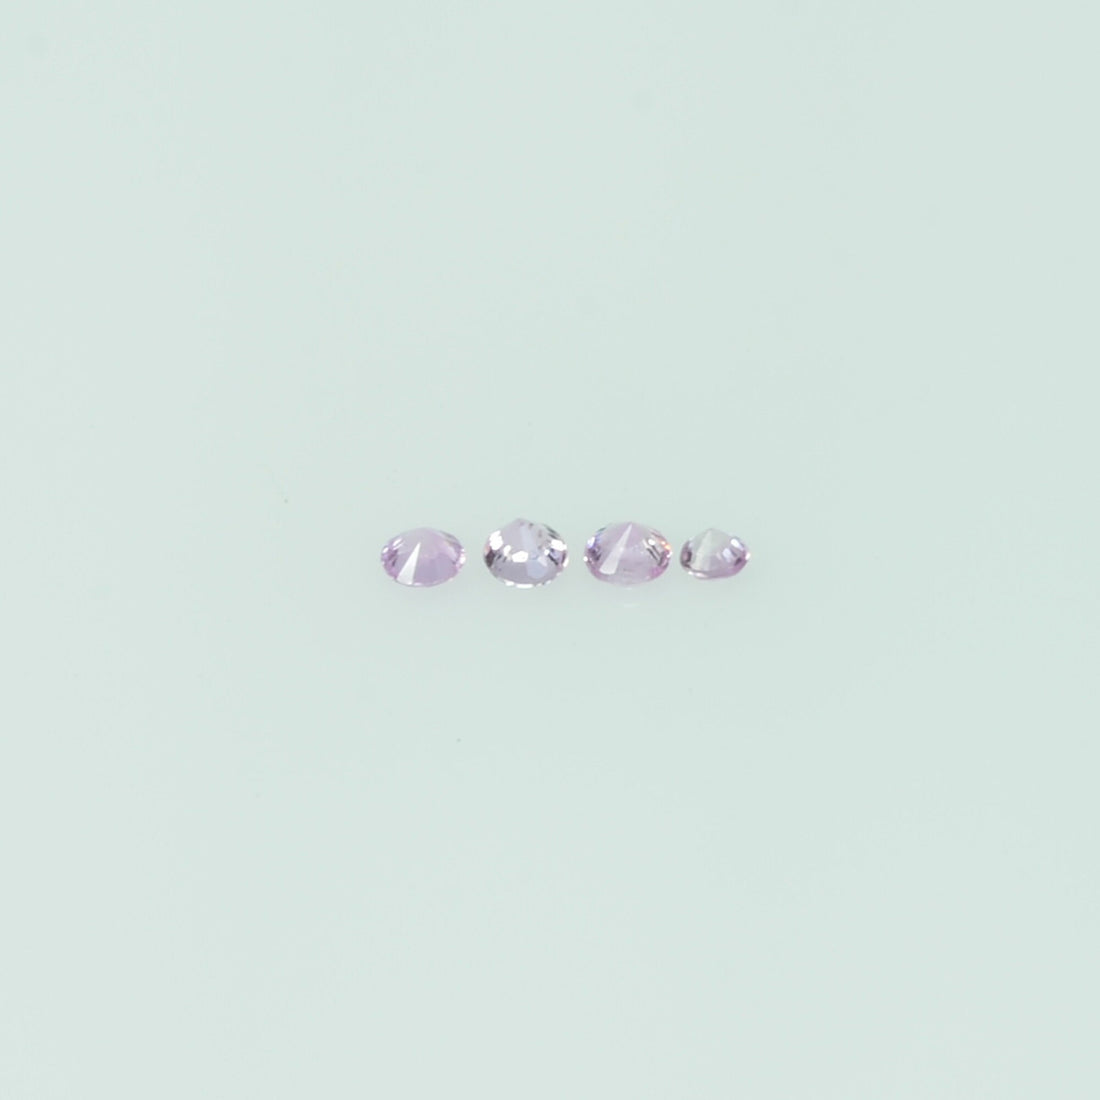 1.0-2.2 mm Natural Pink Sapphire Loose Gemstone Round Diamond Cut Vs Quality Color